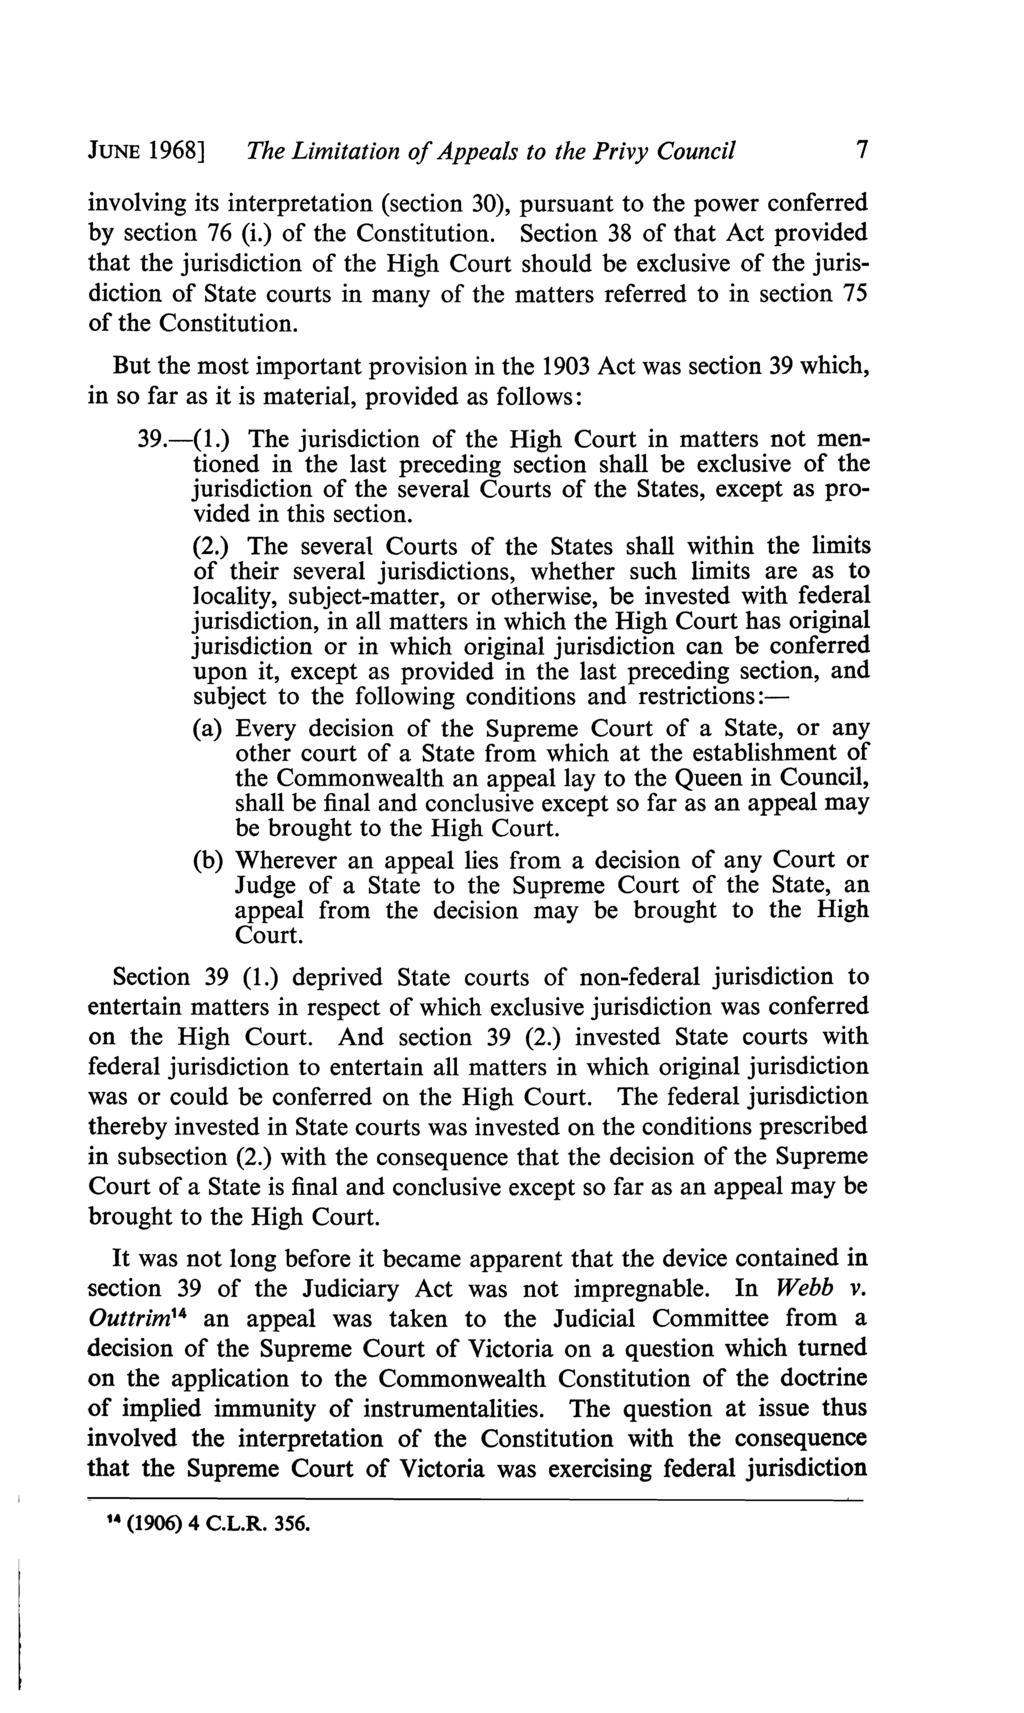 JUNE 1968] The Limitation of Appeals to the Privy Council 7 involving its interpretation (section 30), pursuant to the power conferred by section 76 (i.) of the Constitution.